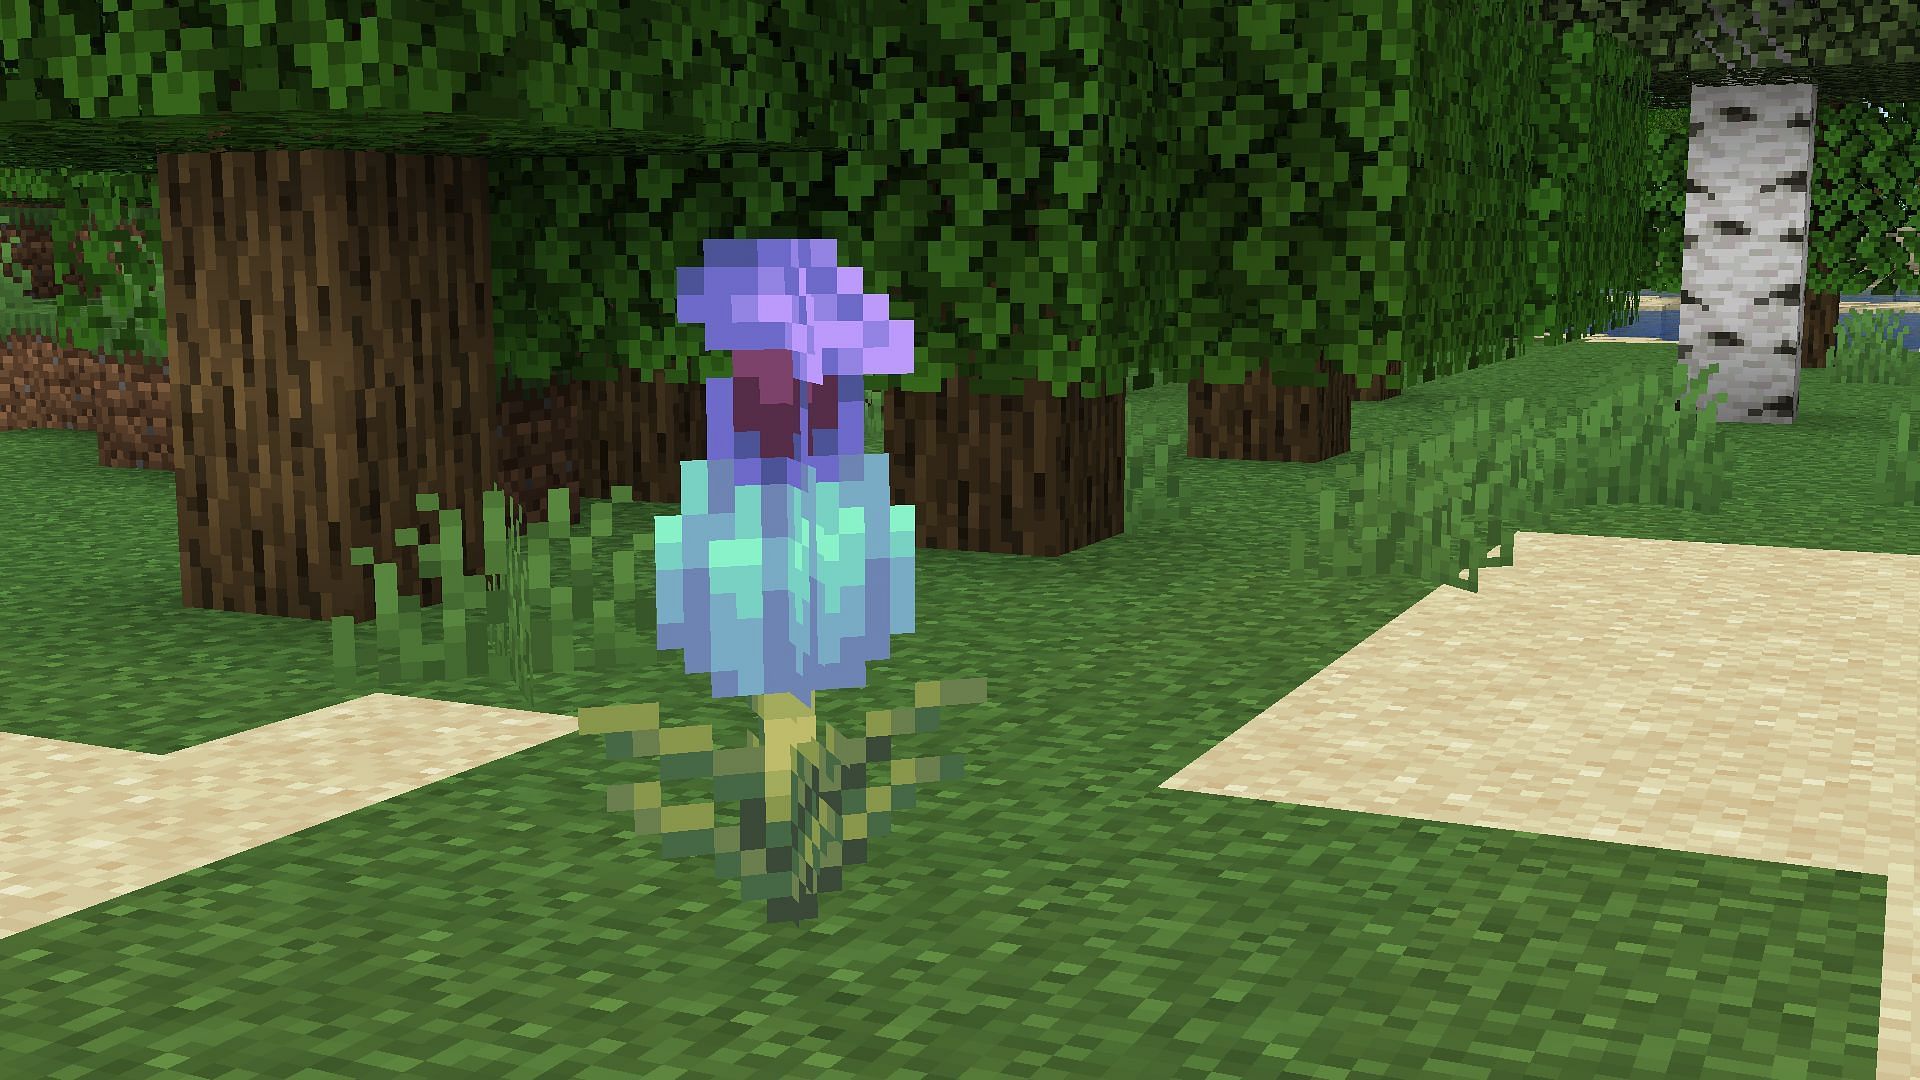 Pitcher plant is a new addition to the Sniffer mob and its features in Minecraft 1.20 snapshot 23w12a. (Image via Mojang)